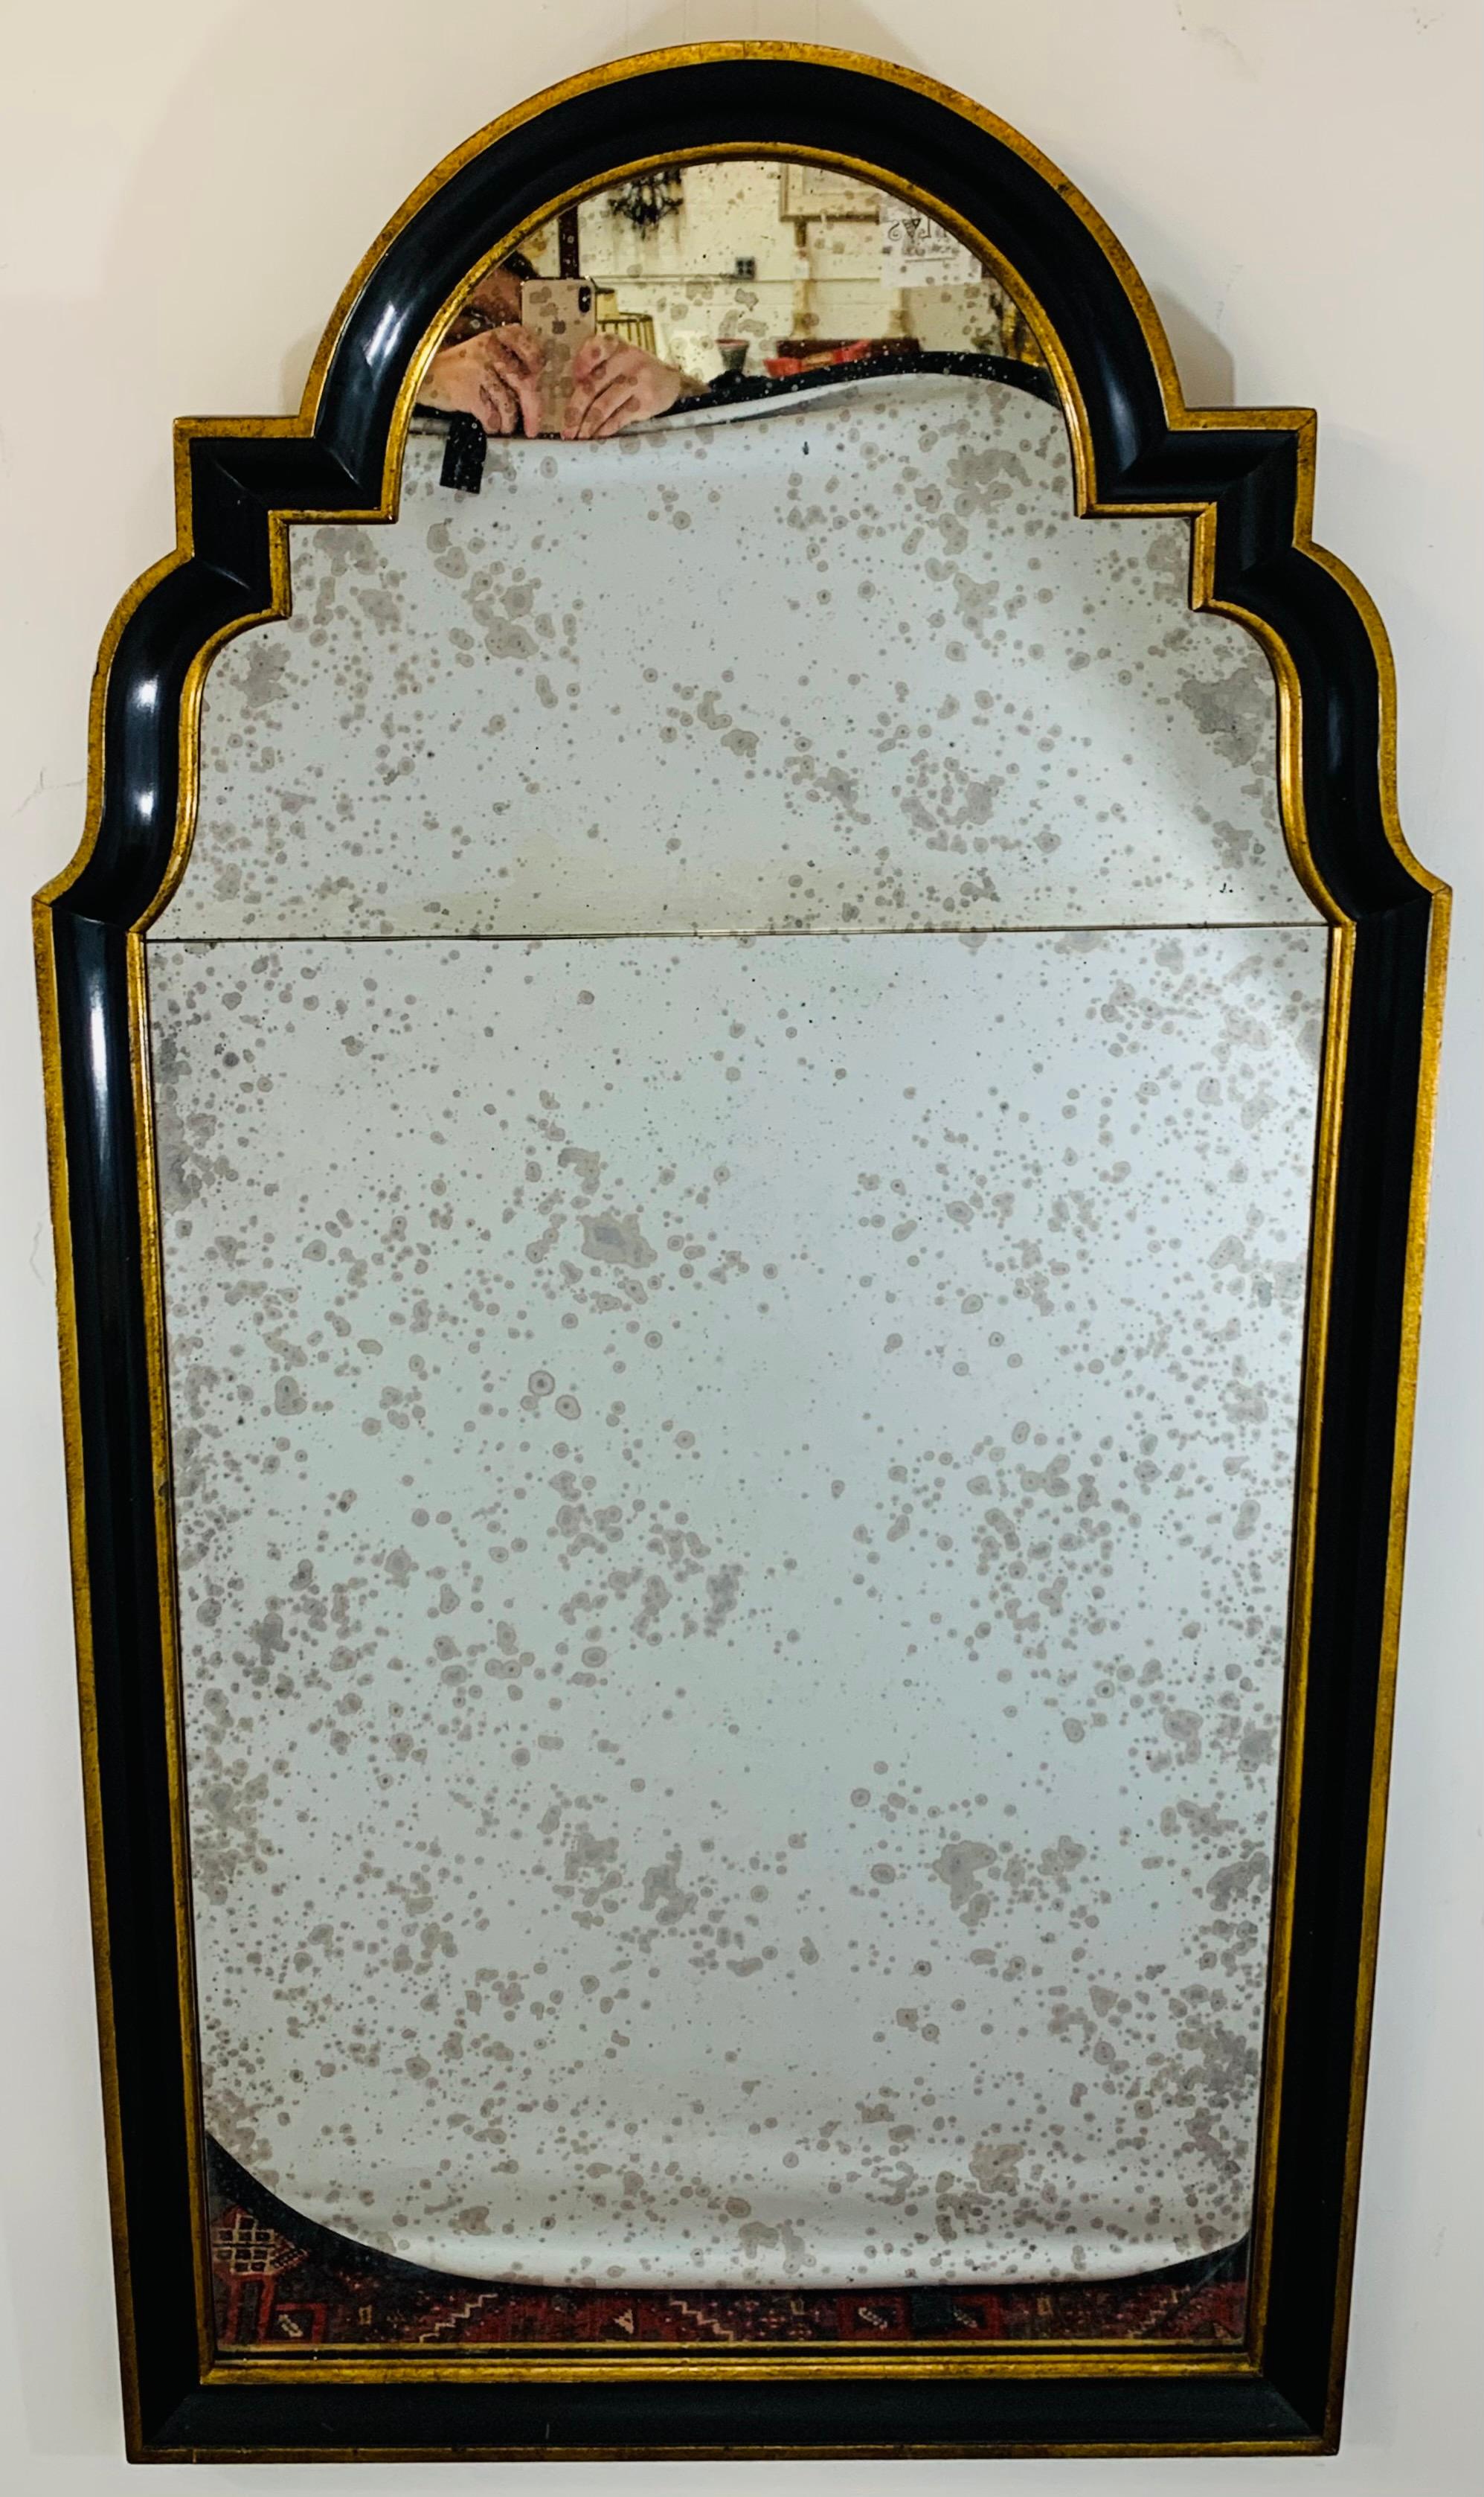 A stunning antiqued glass mirror Hollywood Regency wall , mantel or console mirror in an ebony black and finely hand painted with gold lines shaping the mirror frame. The arched design and overall versatile style of the mirror is classy and will add